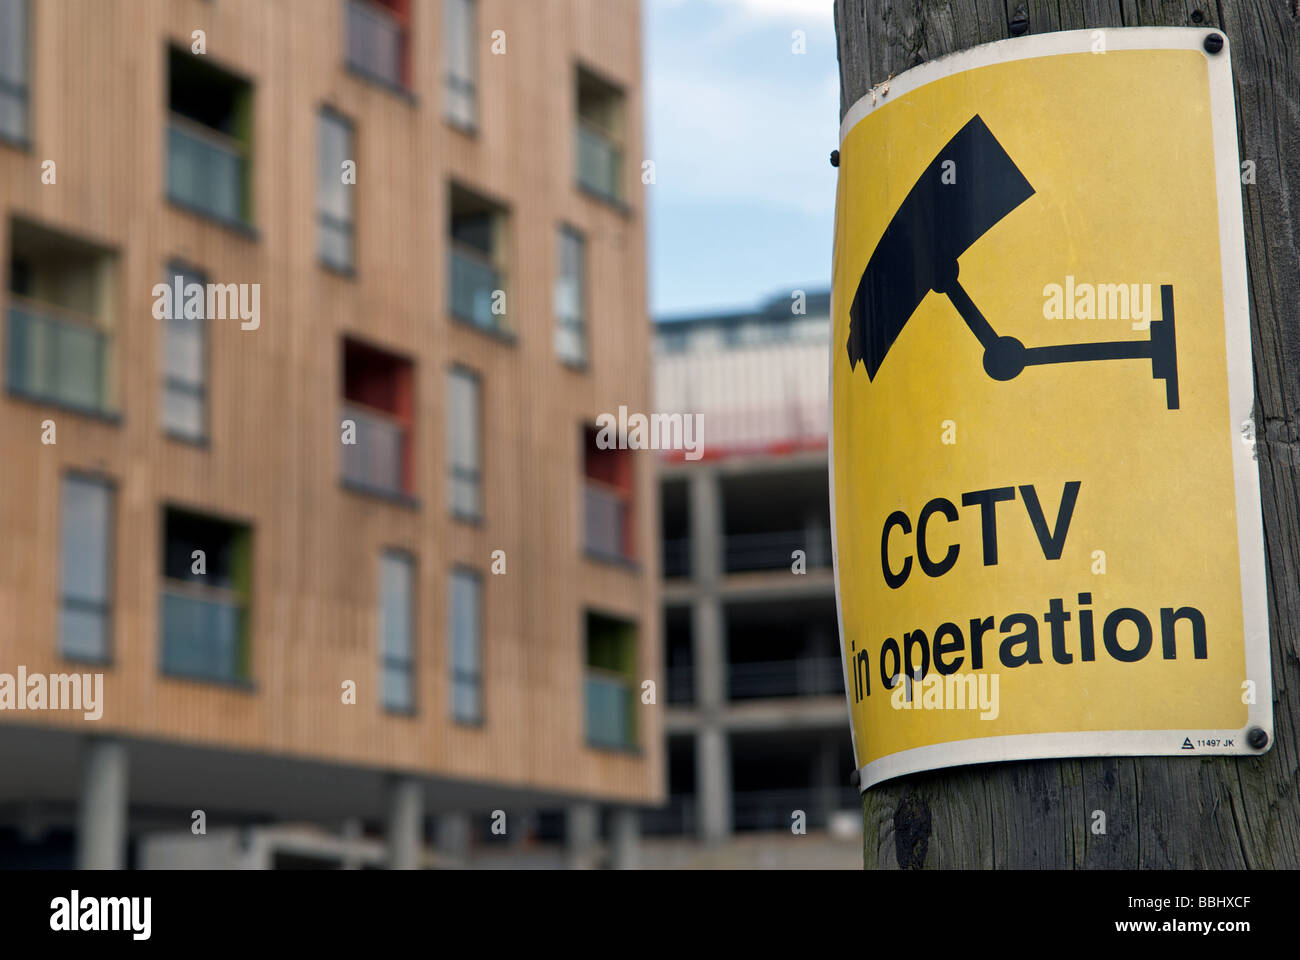 CCTV cameras in operation warning sign on a construction site, Ipswich, Suffolk, UK. Stock Photo